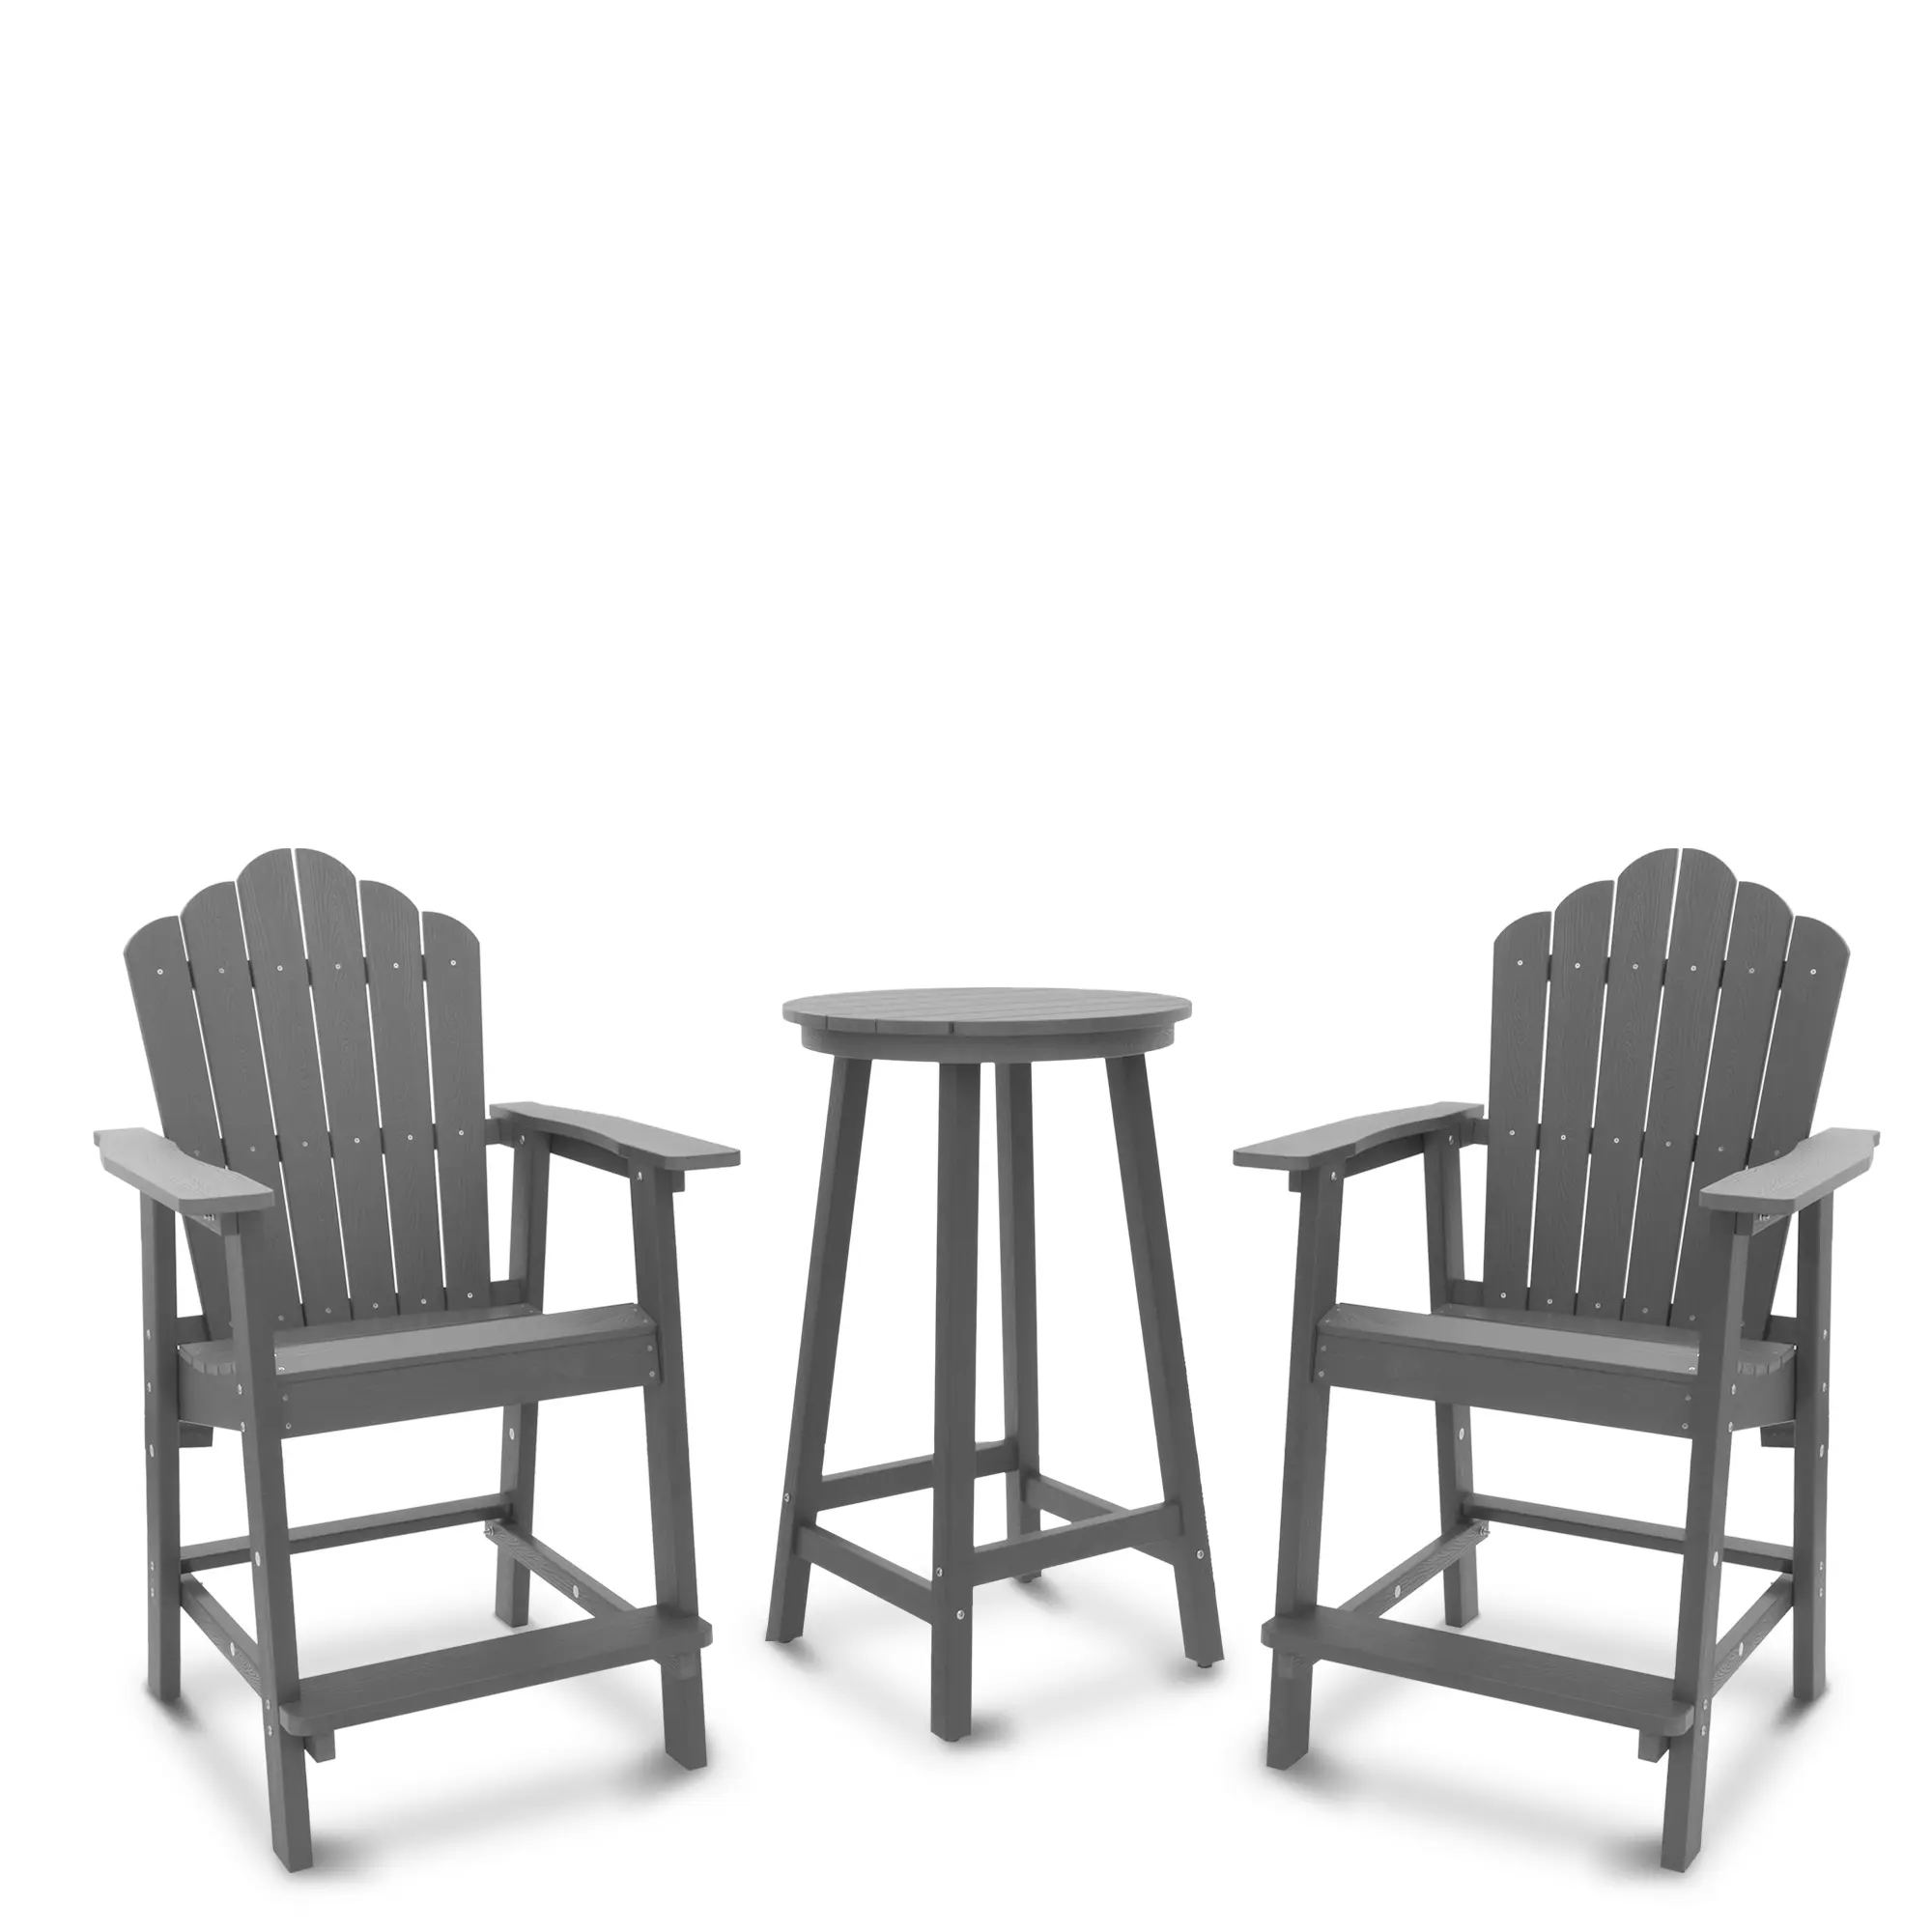 3-Piece Adirondack Bar Height Chairs Set of 2 and Table for Outdoor Deck Lawn Pool Backyard